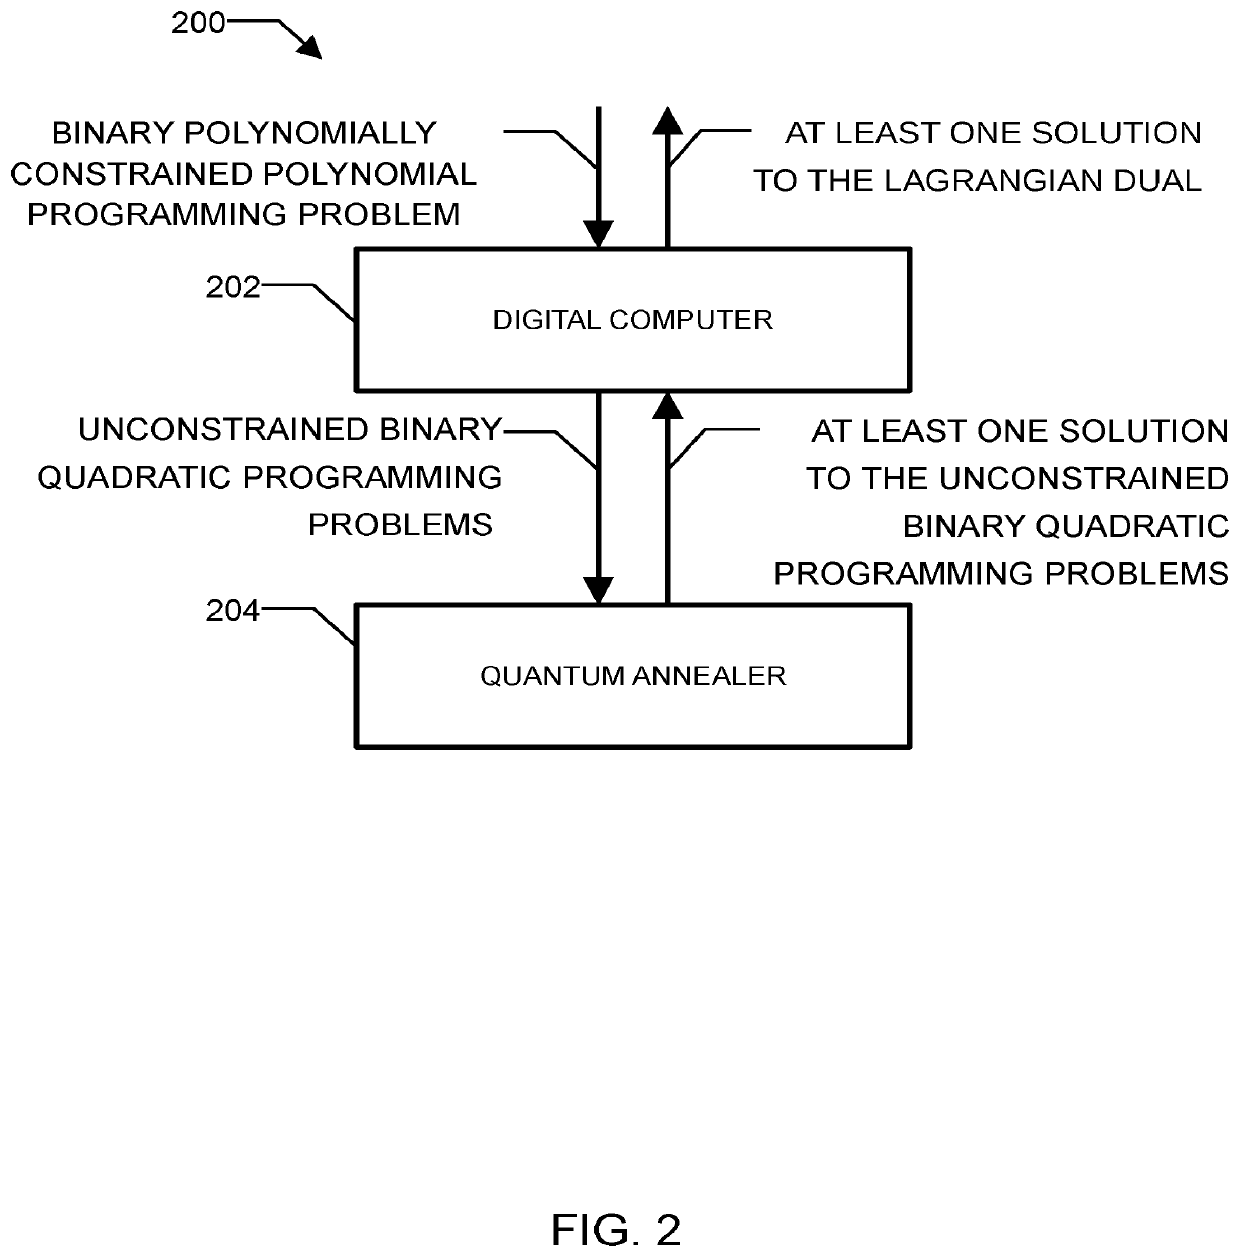 Method and system for solving the lagrangian dual of a binary polynomially constrained polynomial programming problem using a quantum annealer